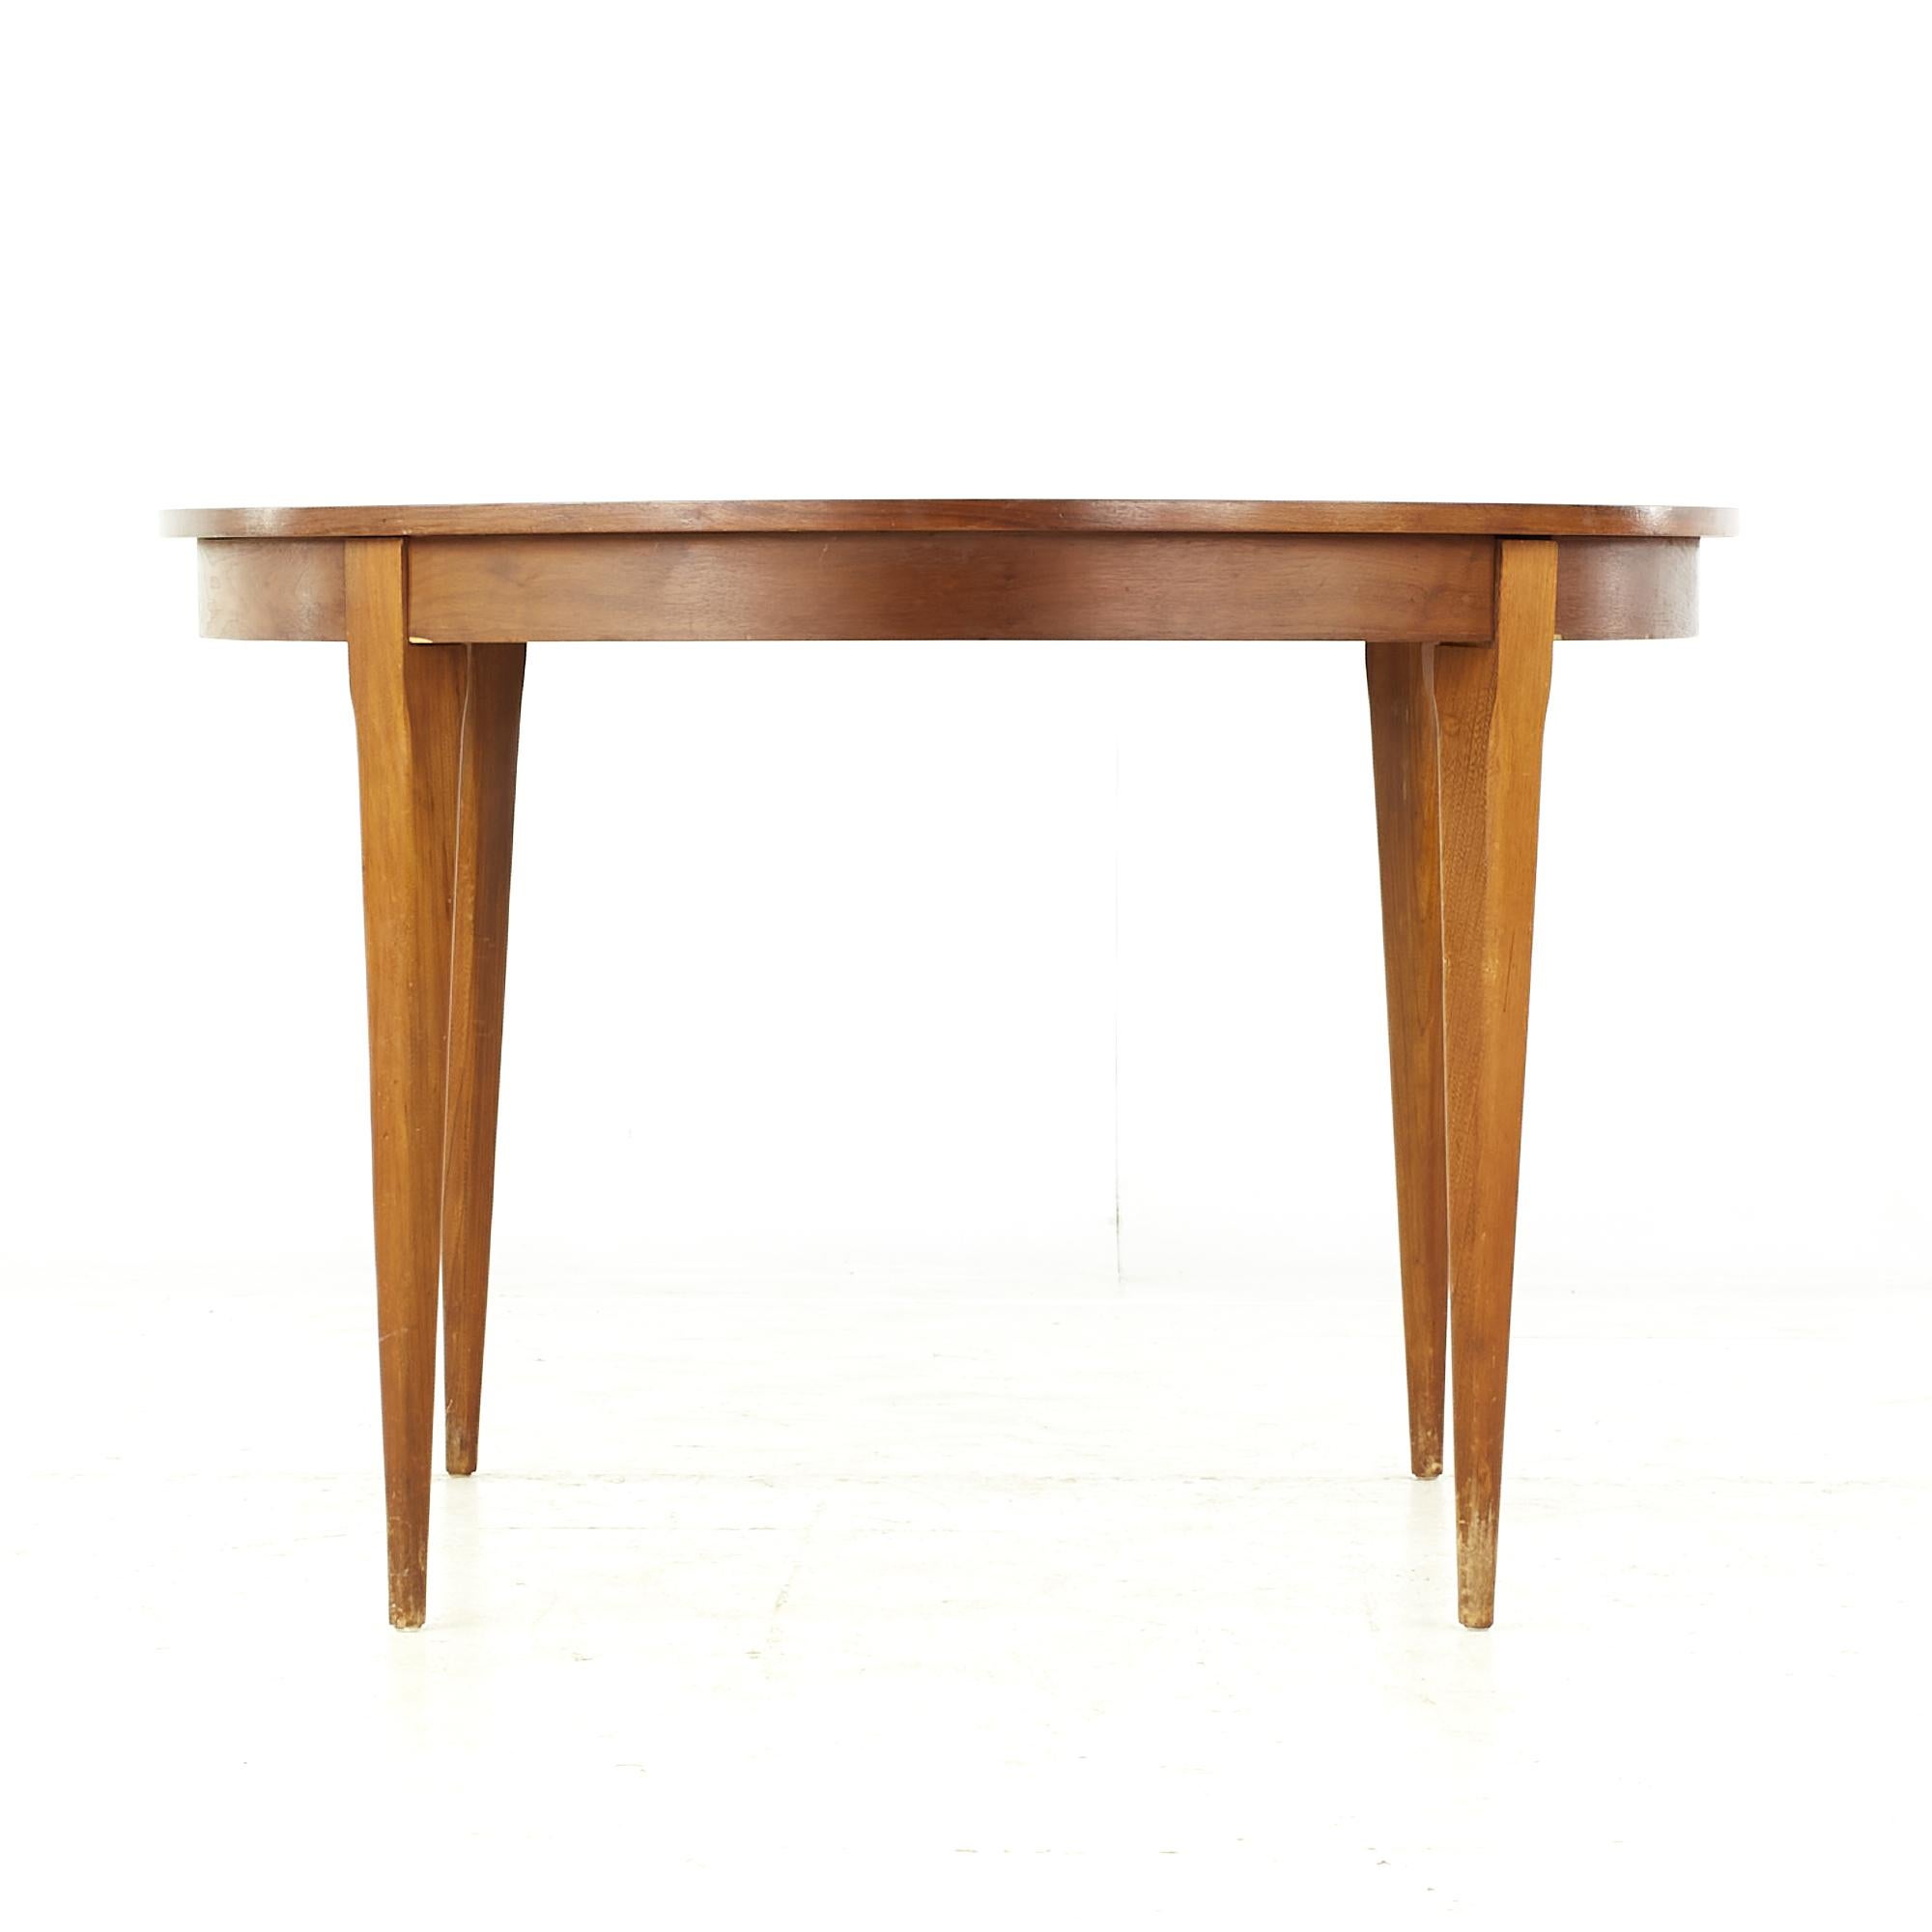 Young Manufacturing Midcentury Walnut Dining Table with 2 Leaves In Good Condition For Sale In Countryside, IL